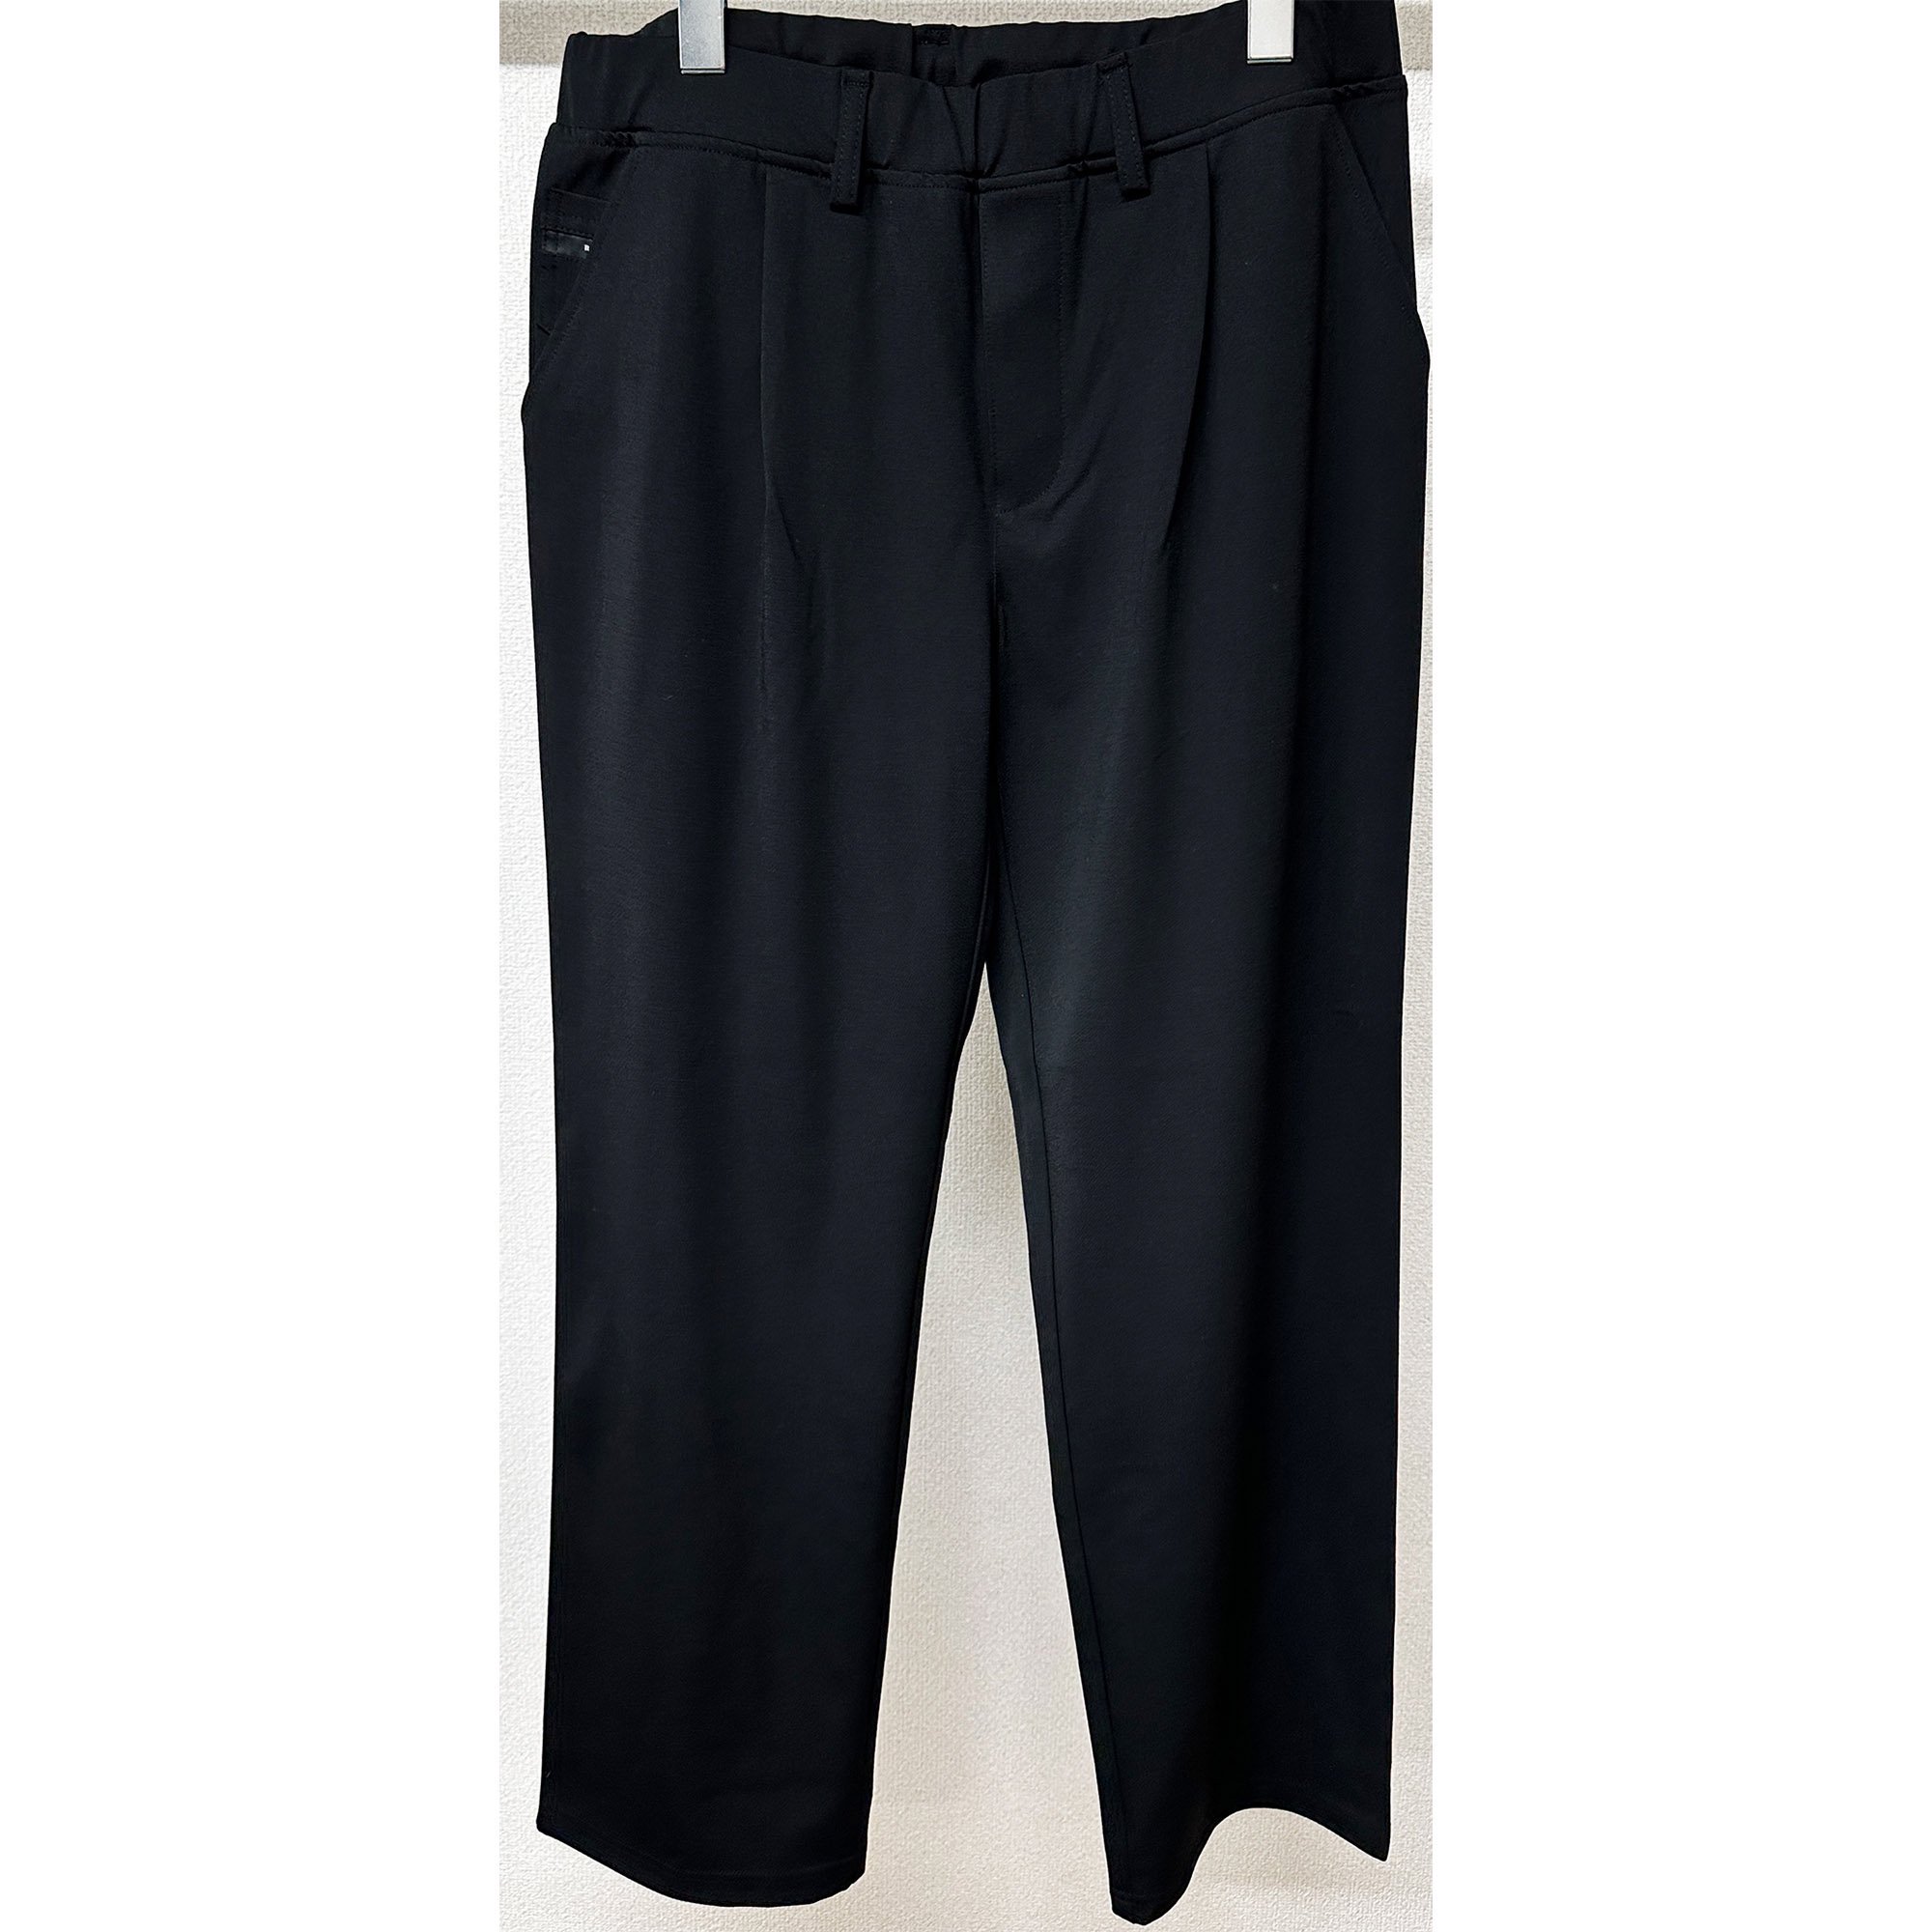 <img class='new_mark_img1' src='https://img.shop-pro.jp/img/new/icons1.gif' style='border:none;display:inline;margin:0px;padding:0px;width:auto;' />CHRIS EASY WIDE TUCK PANTS BLACK